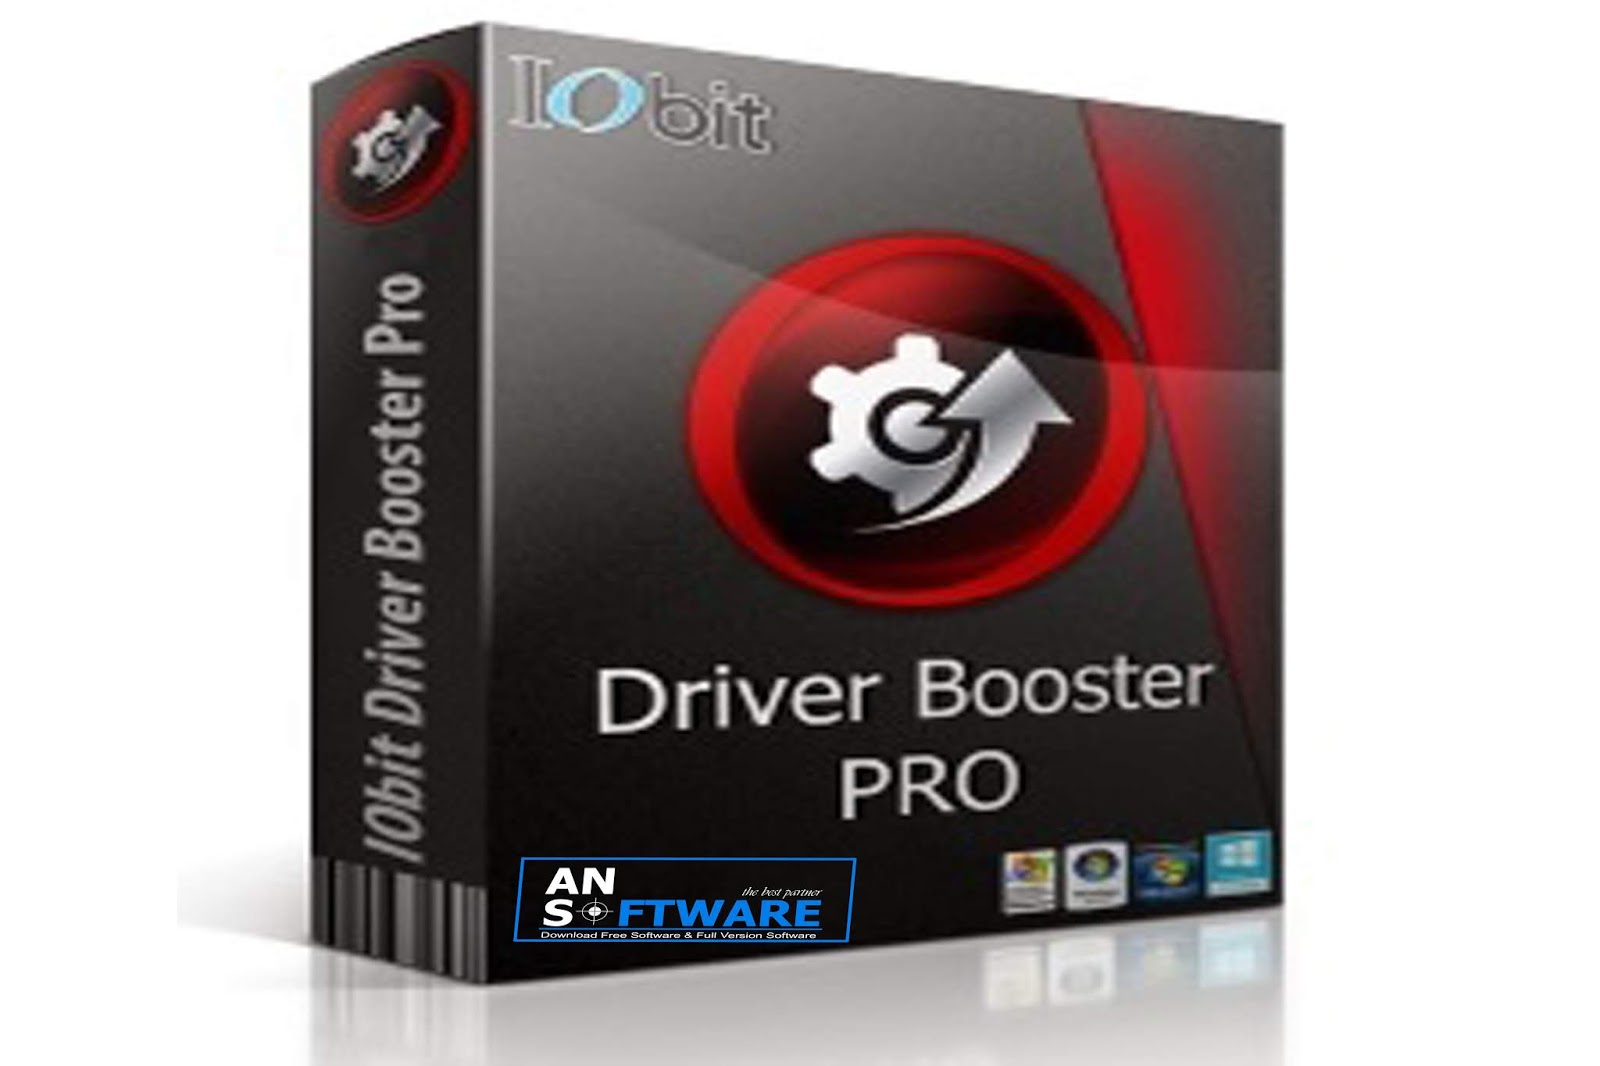 Gear up booster последняя версия. Driver Booster Pro. Driver Booster Pro крякнутый. ПК бустера. Driver Booster upgrade to Pro.